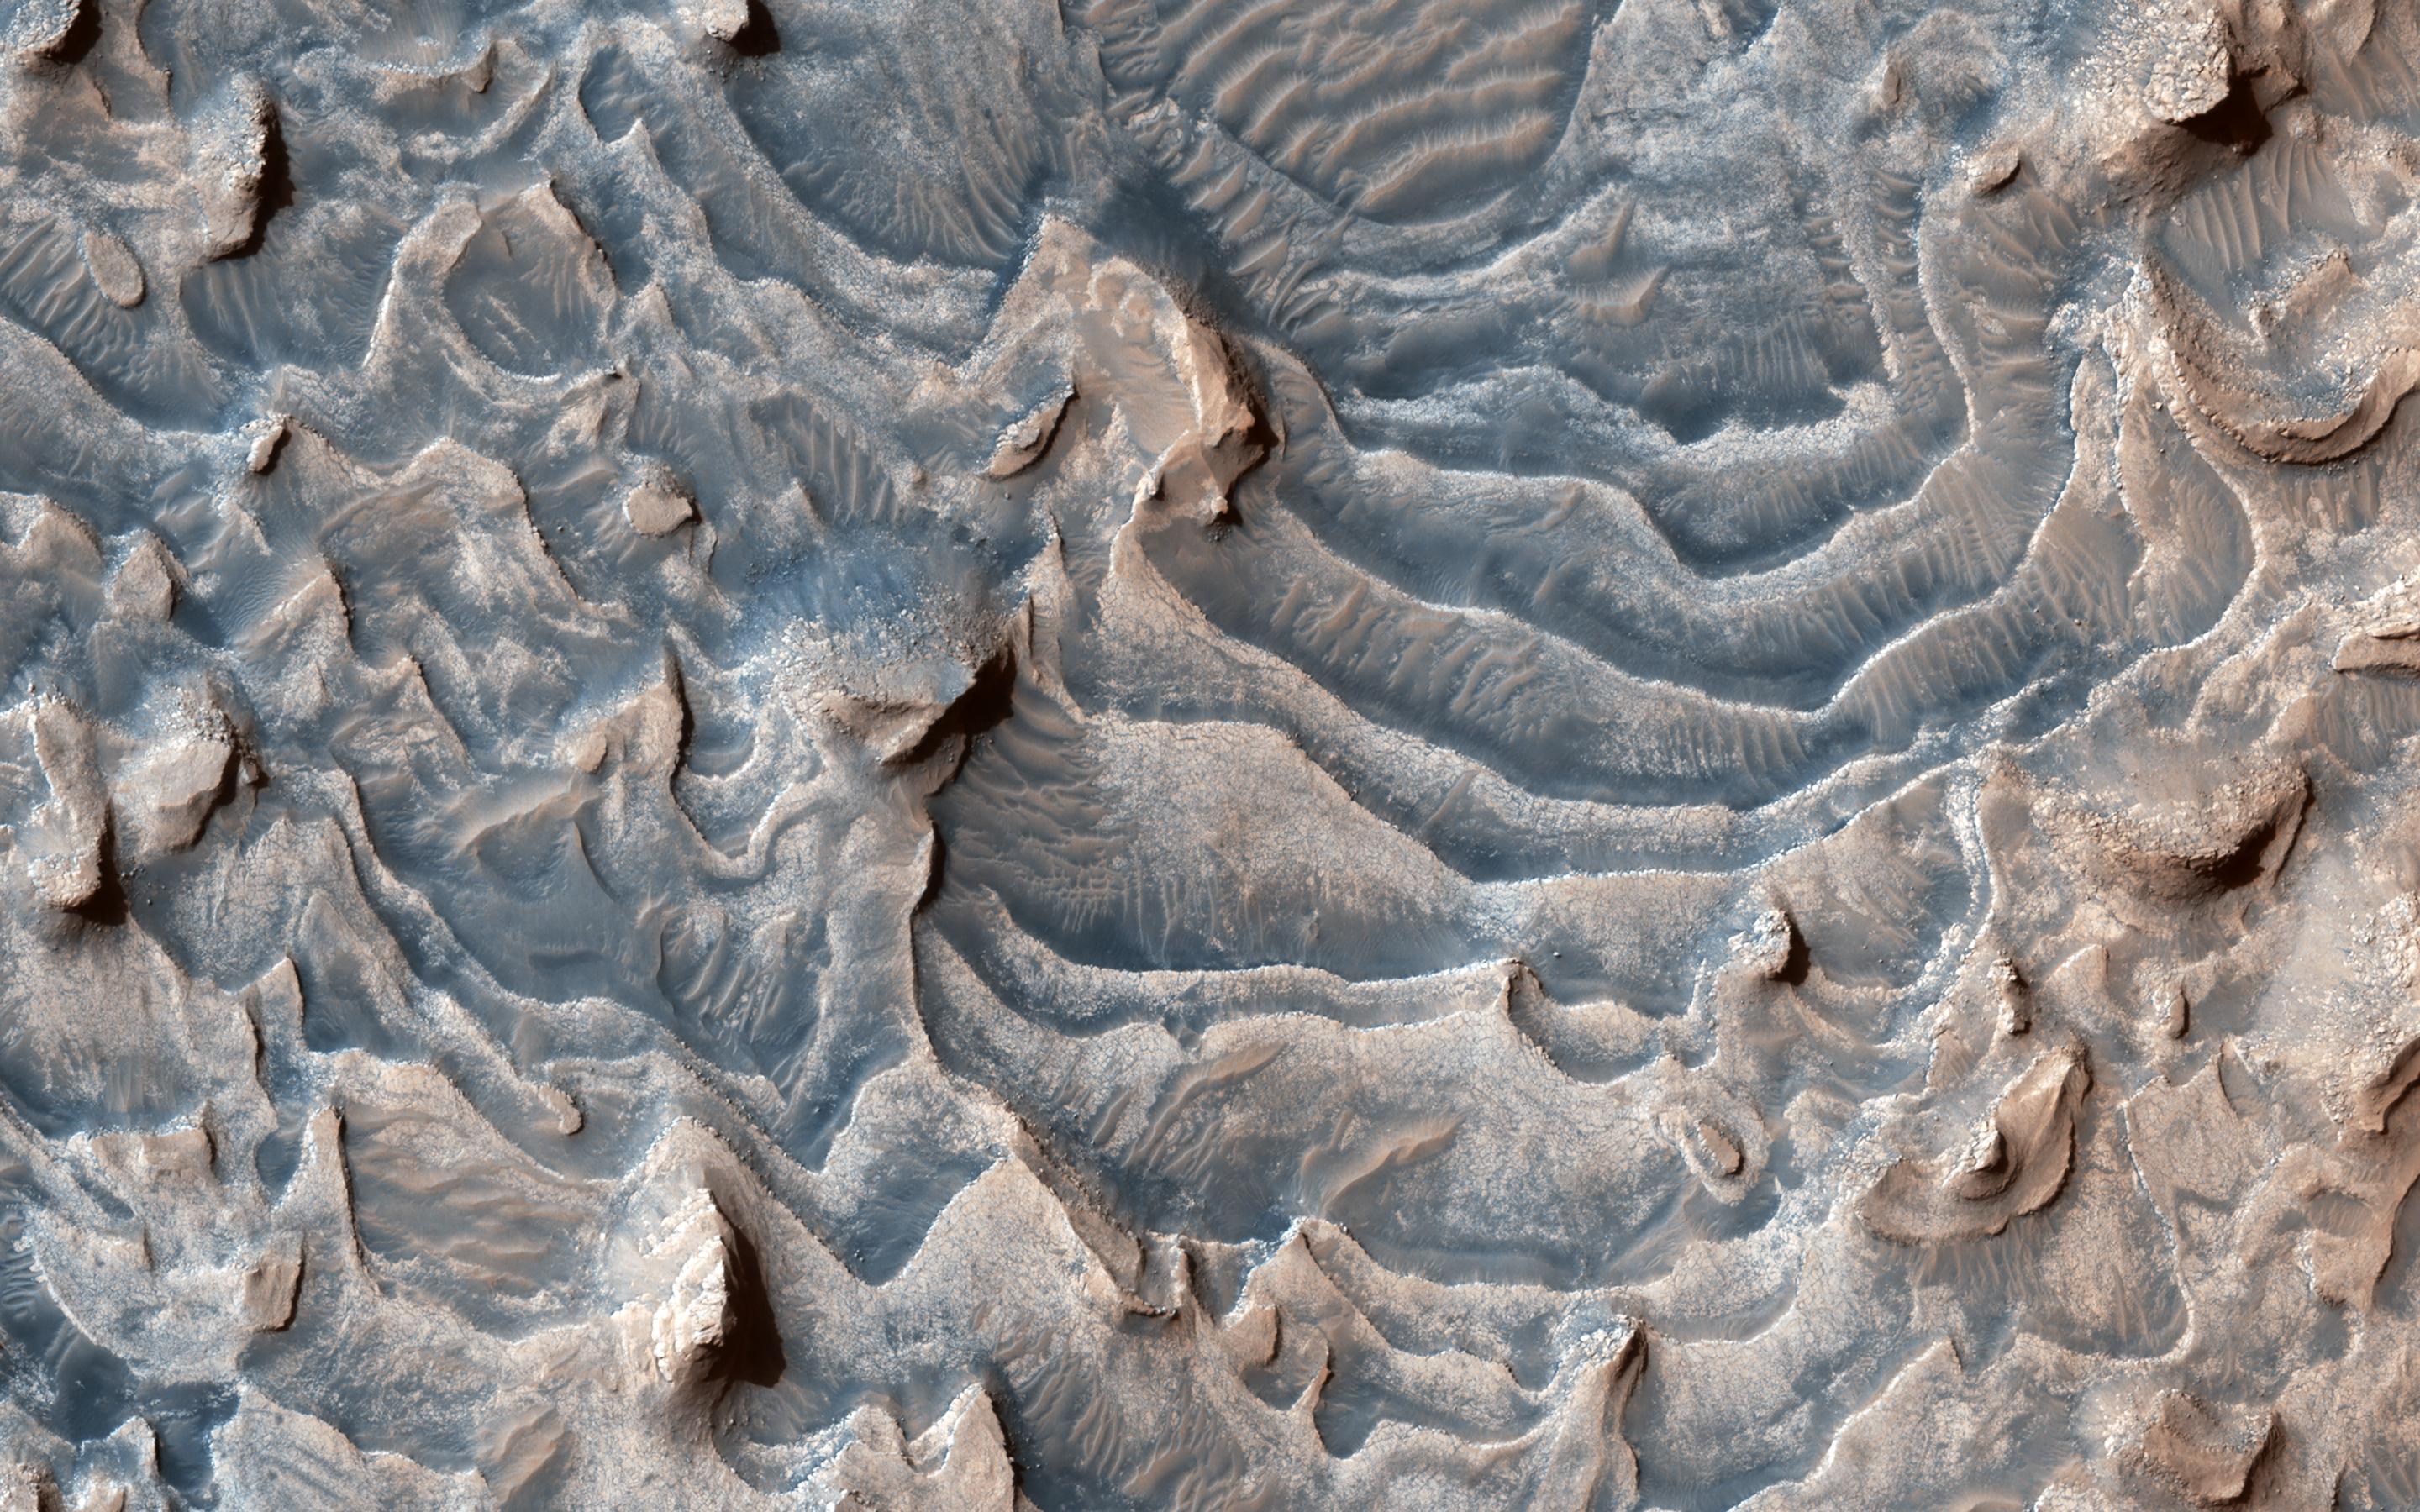 PIA24697: Layers Blanket a Crater Floor